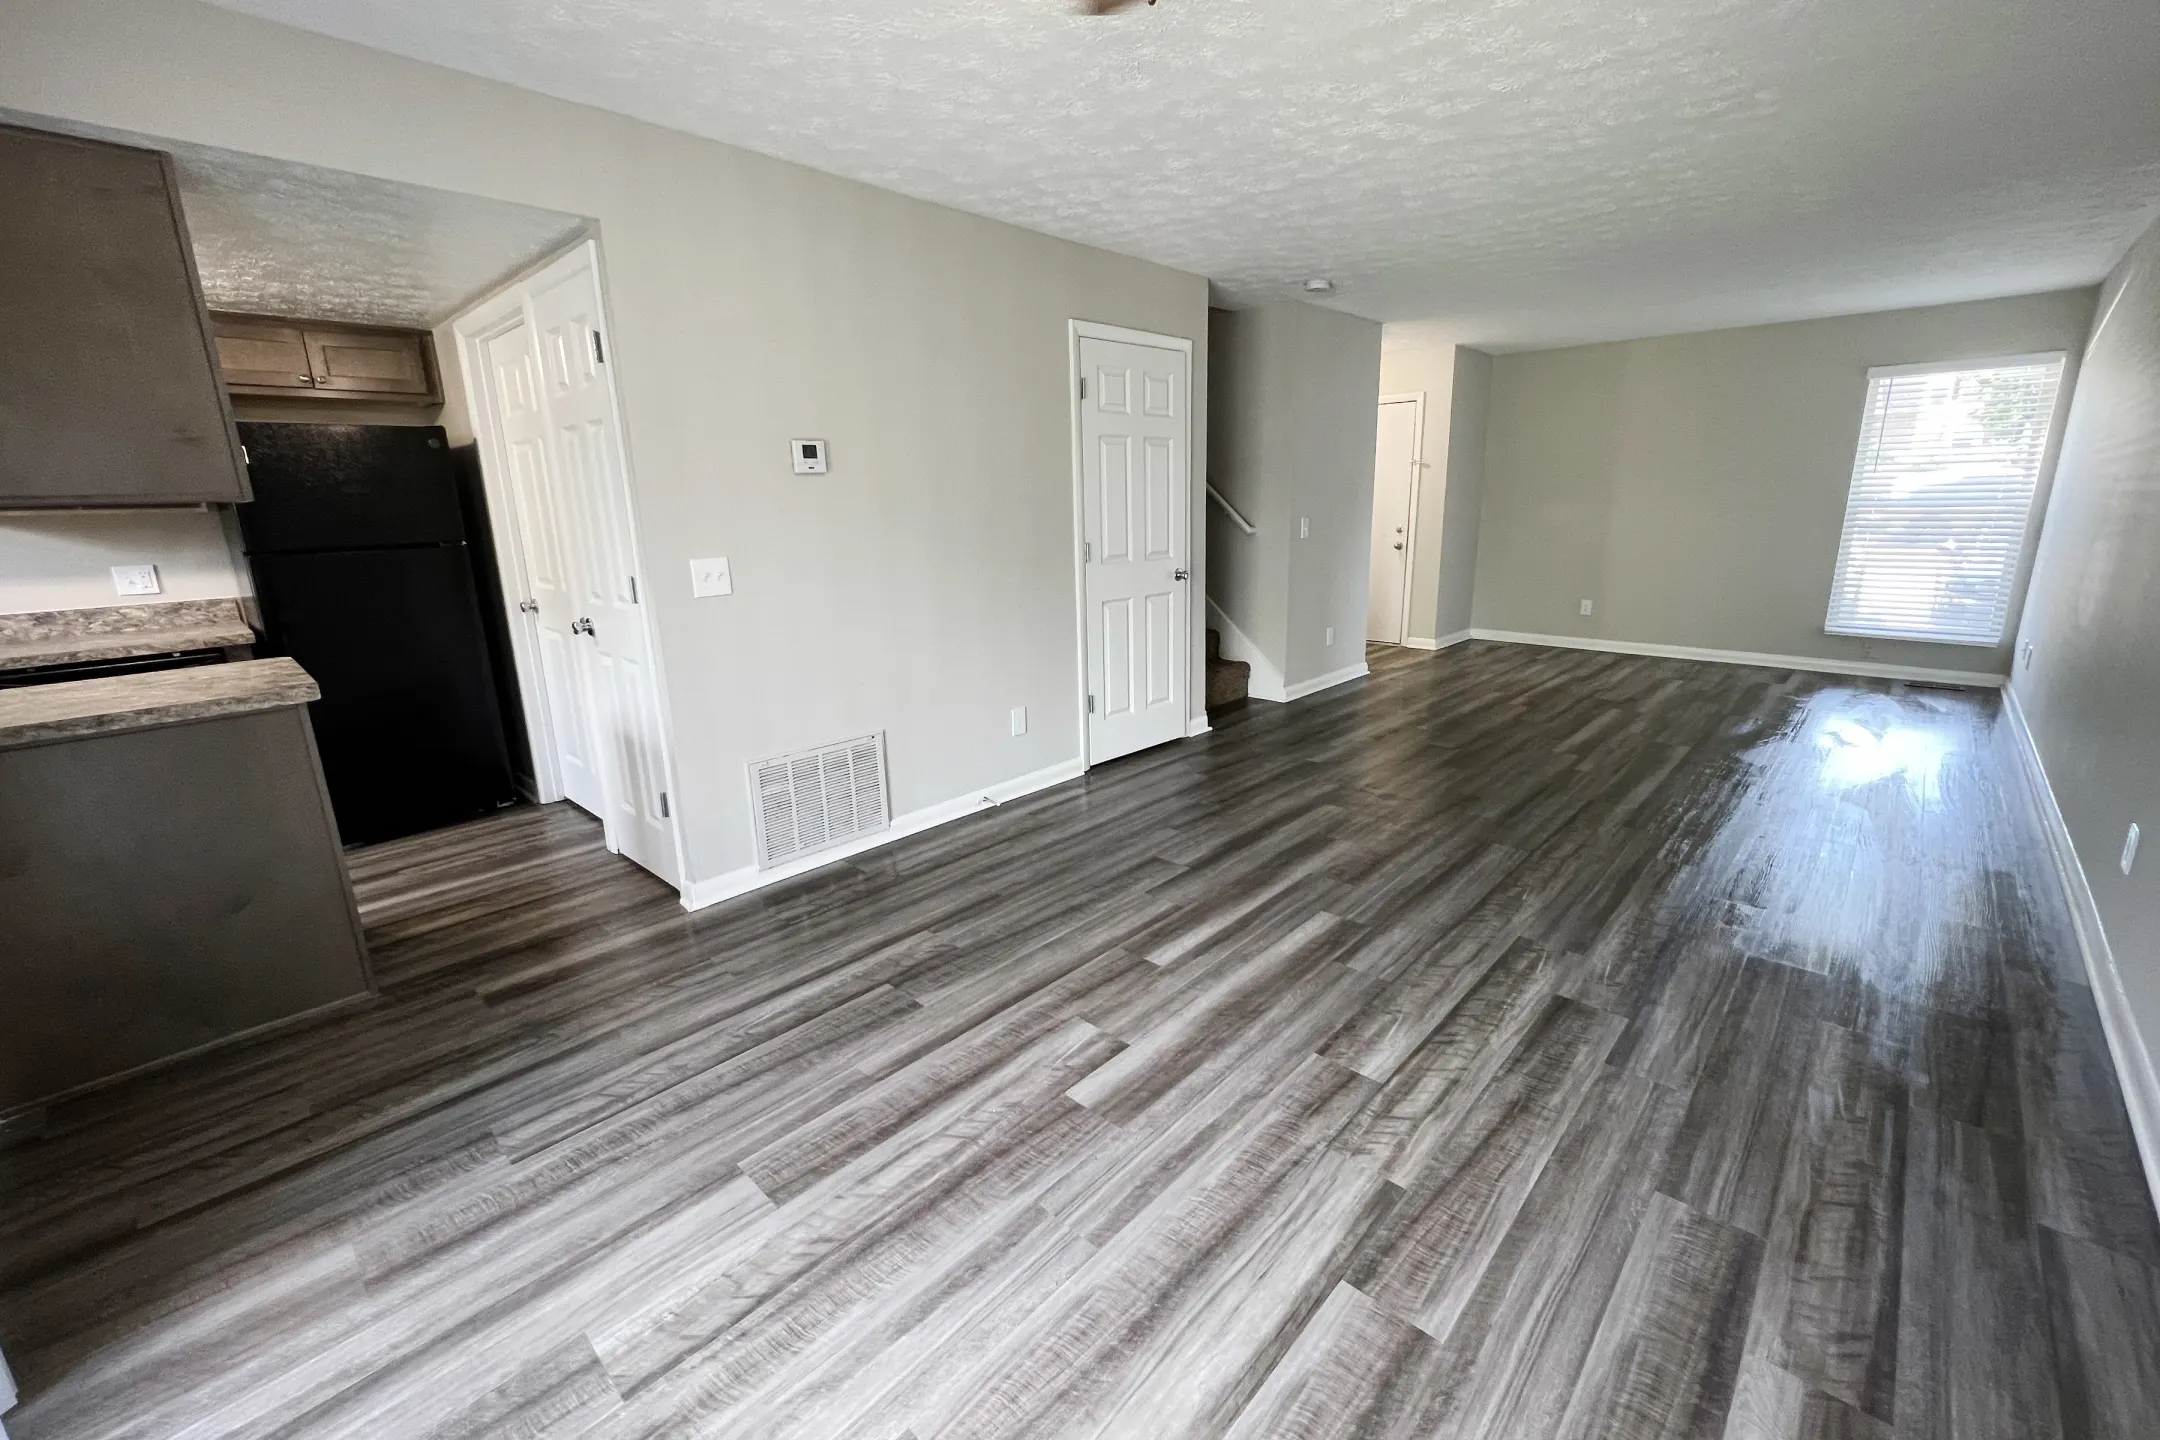 Living Room - Miamisburg By The Mall - Miamisburg, OH